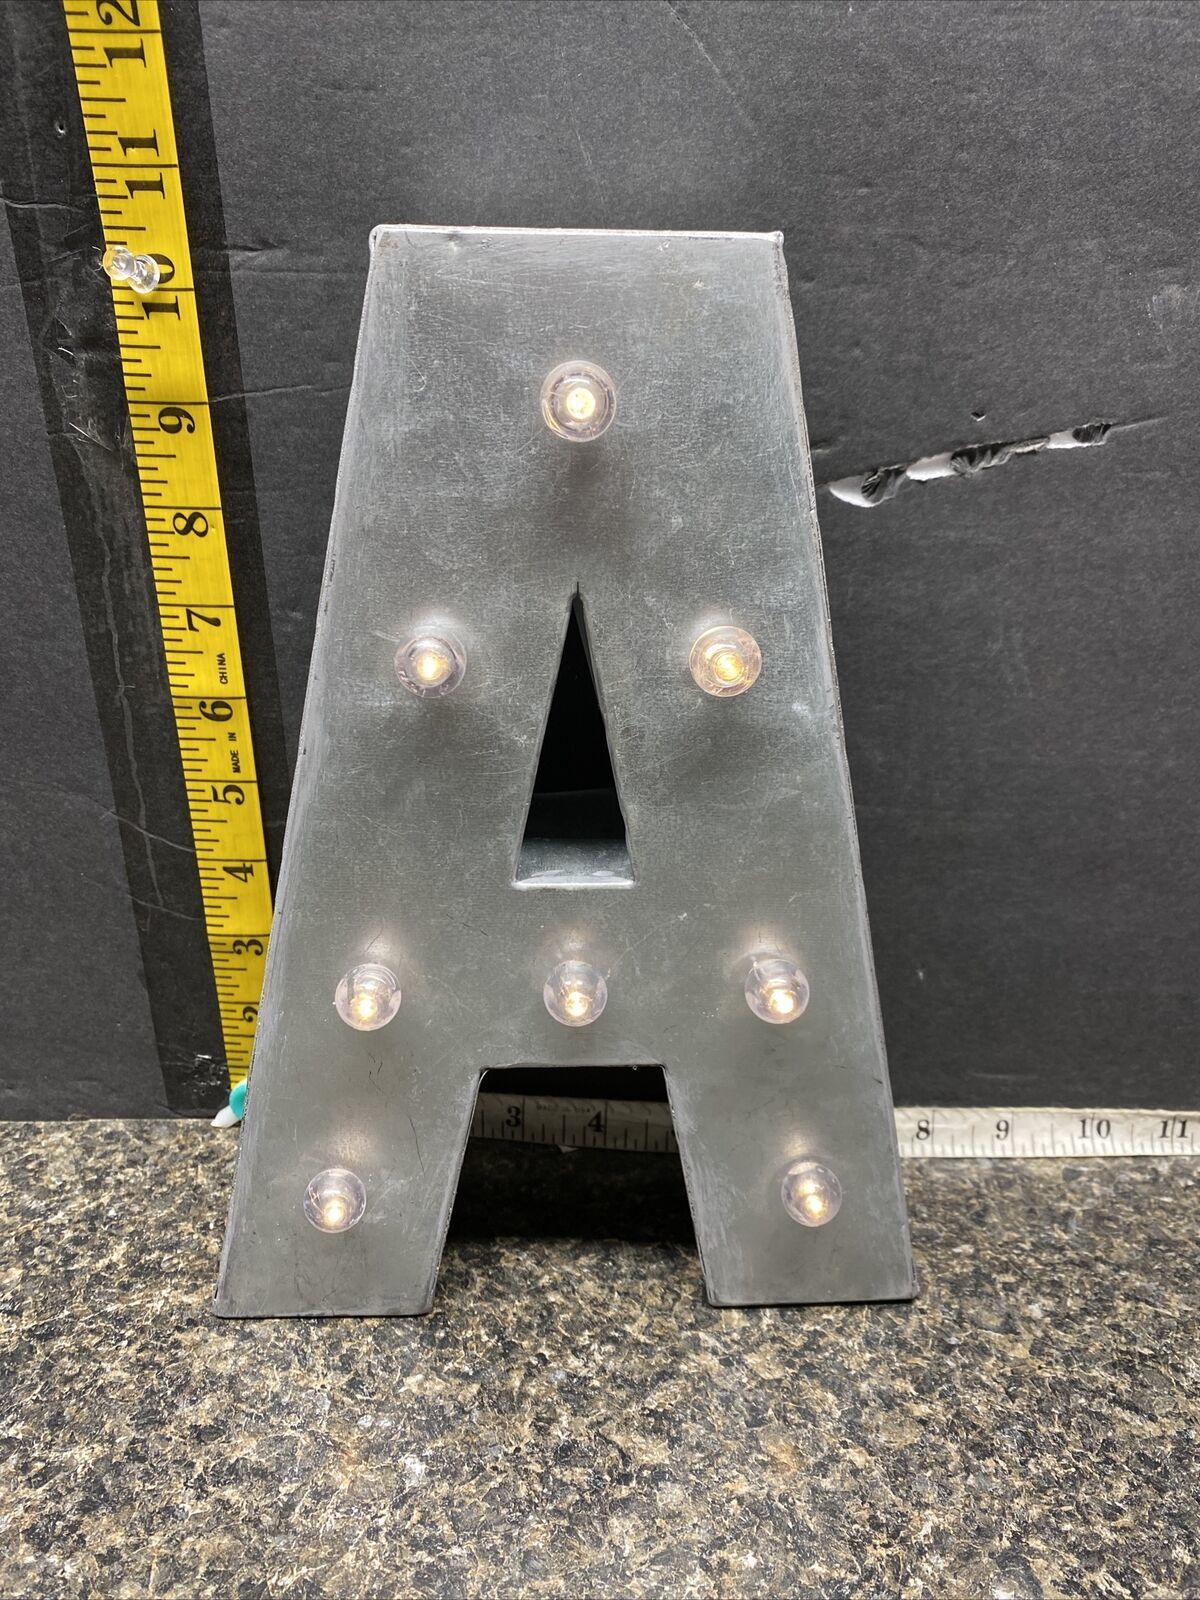 Wall Decor Pier 1 Metal Letter Light Up “A “ Requires 2 AAA batteries. - $10.00